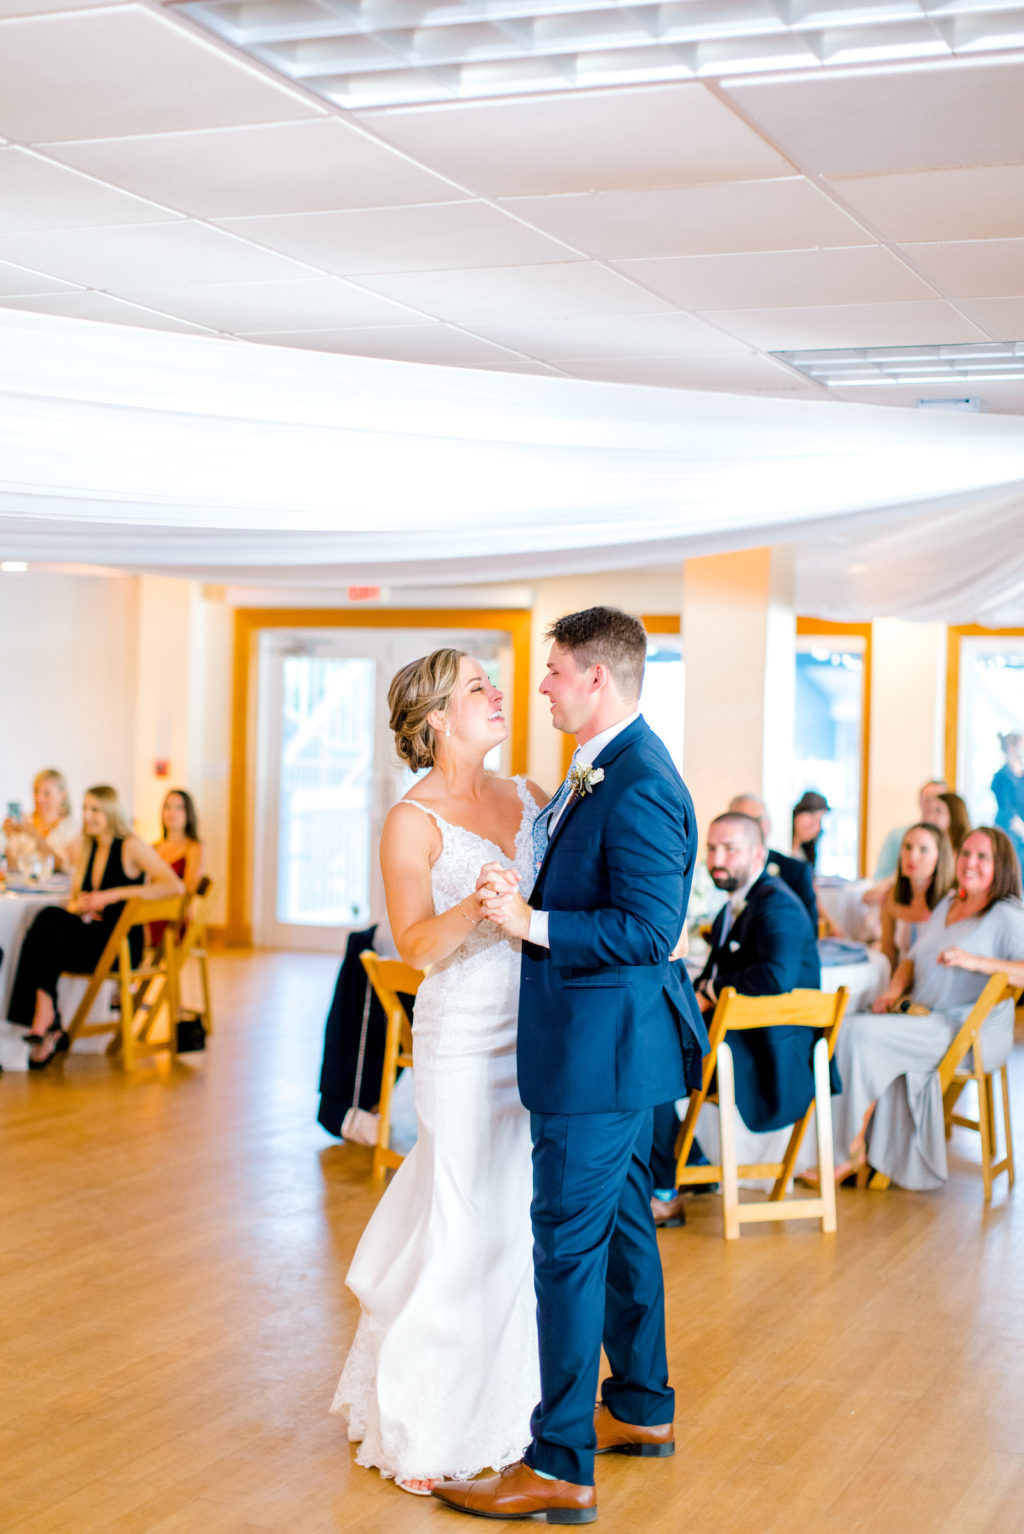 Bride and Groom First Dance at Wedding Reception Portrait | Tampa Bay DJ Grant Hemond and Associations